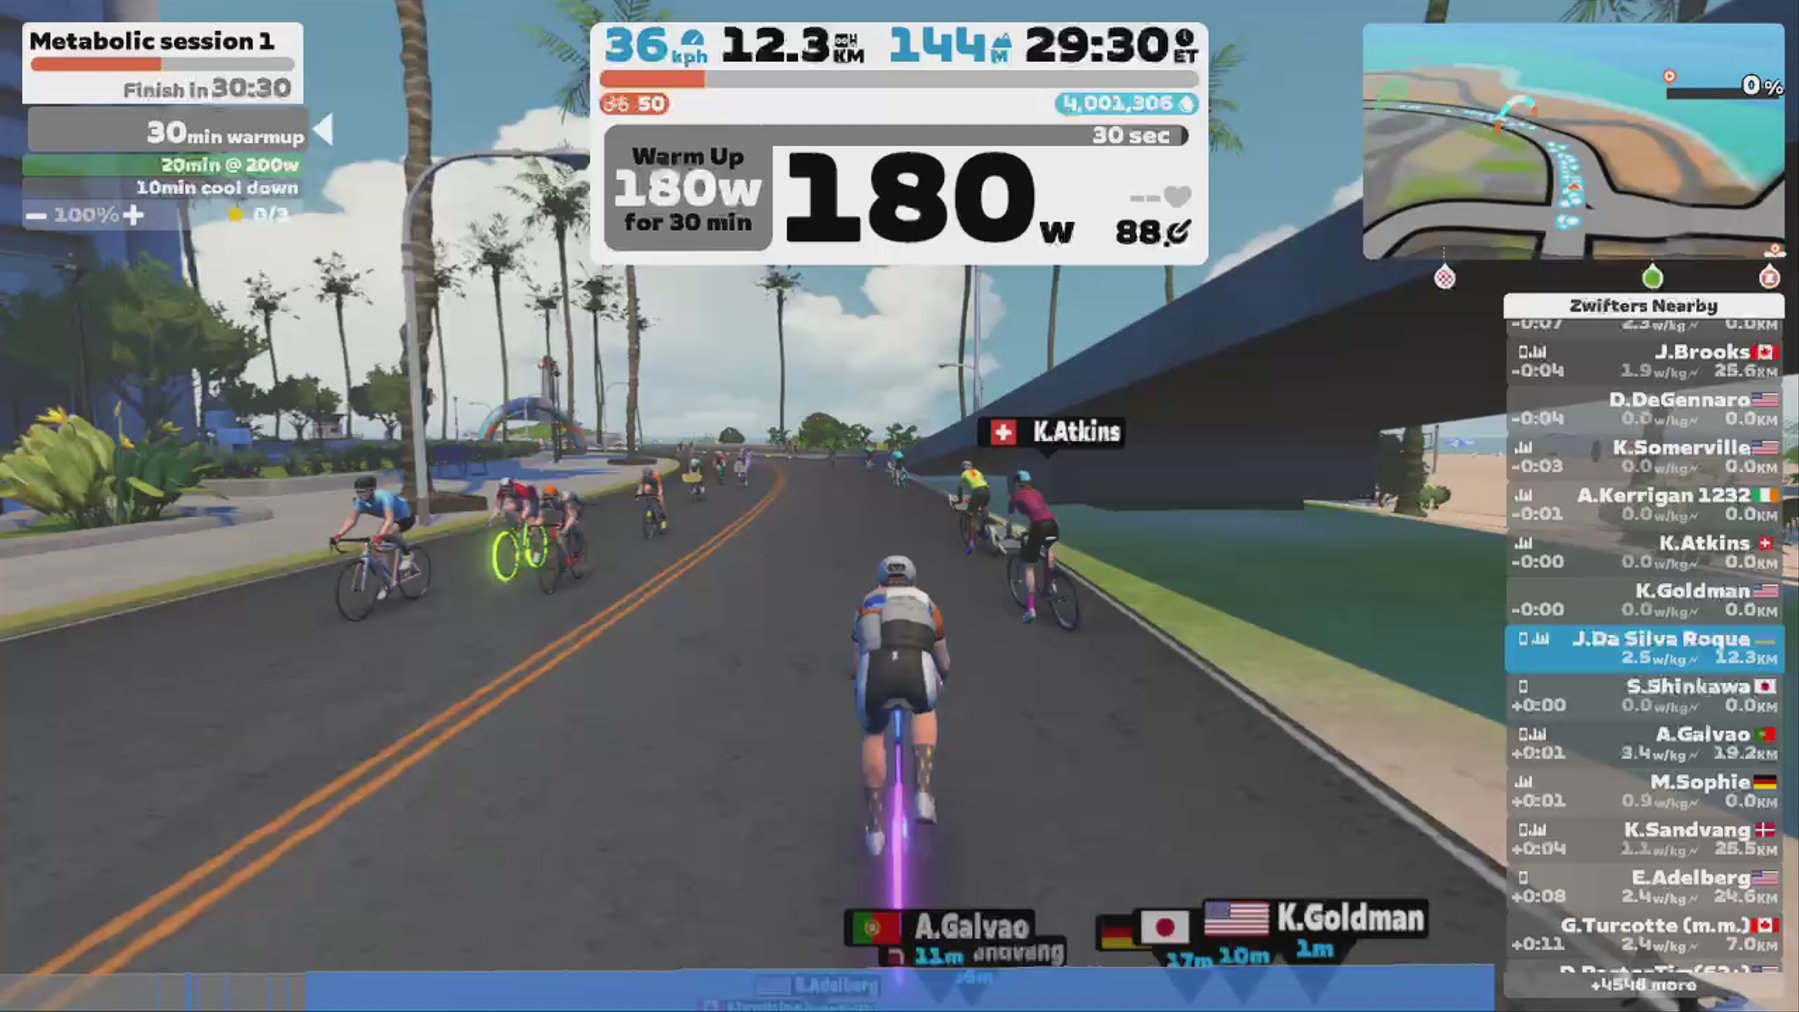 Zwift - Metabolic session 1 in Watopia